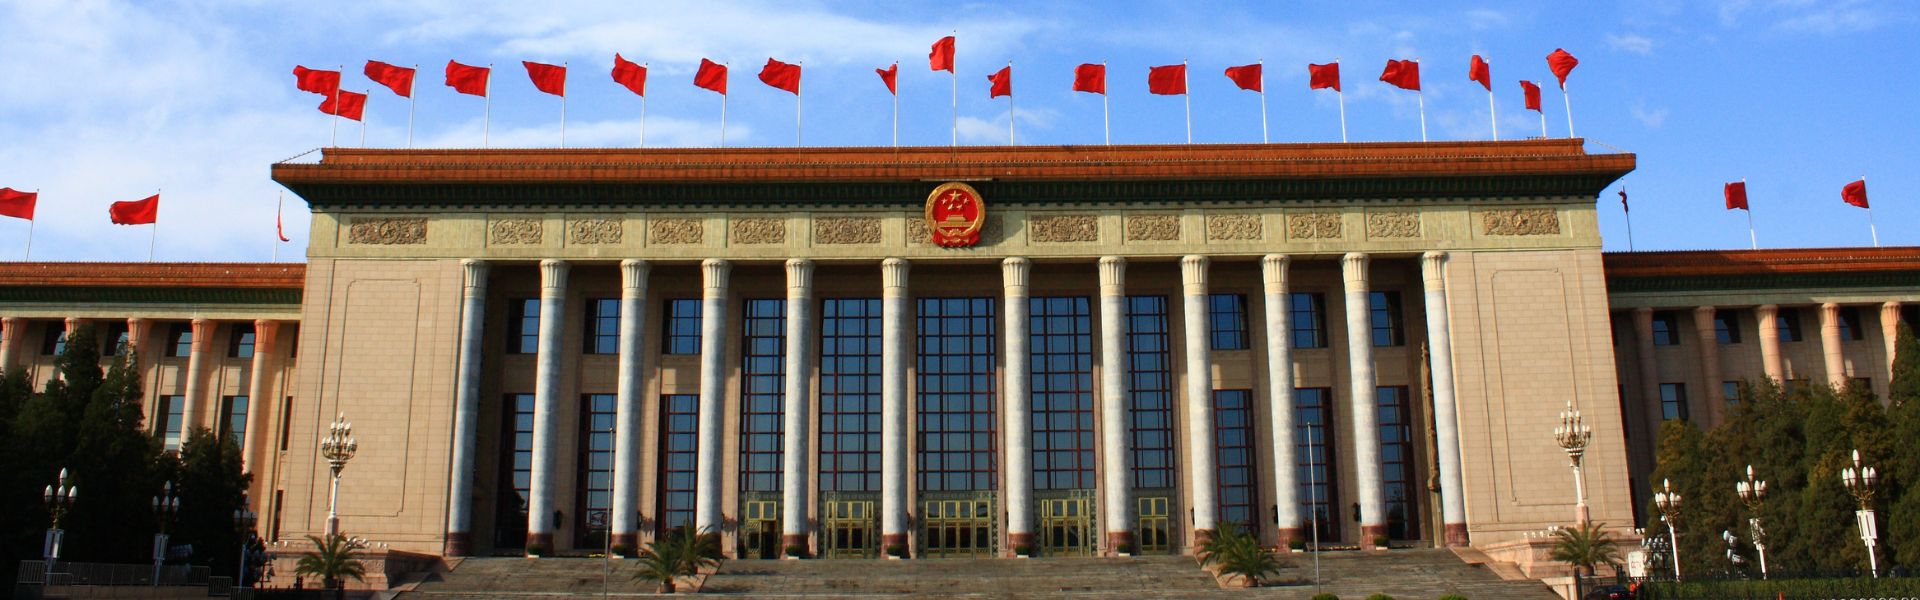 2022 09 29 Great hall of the people